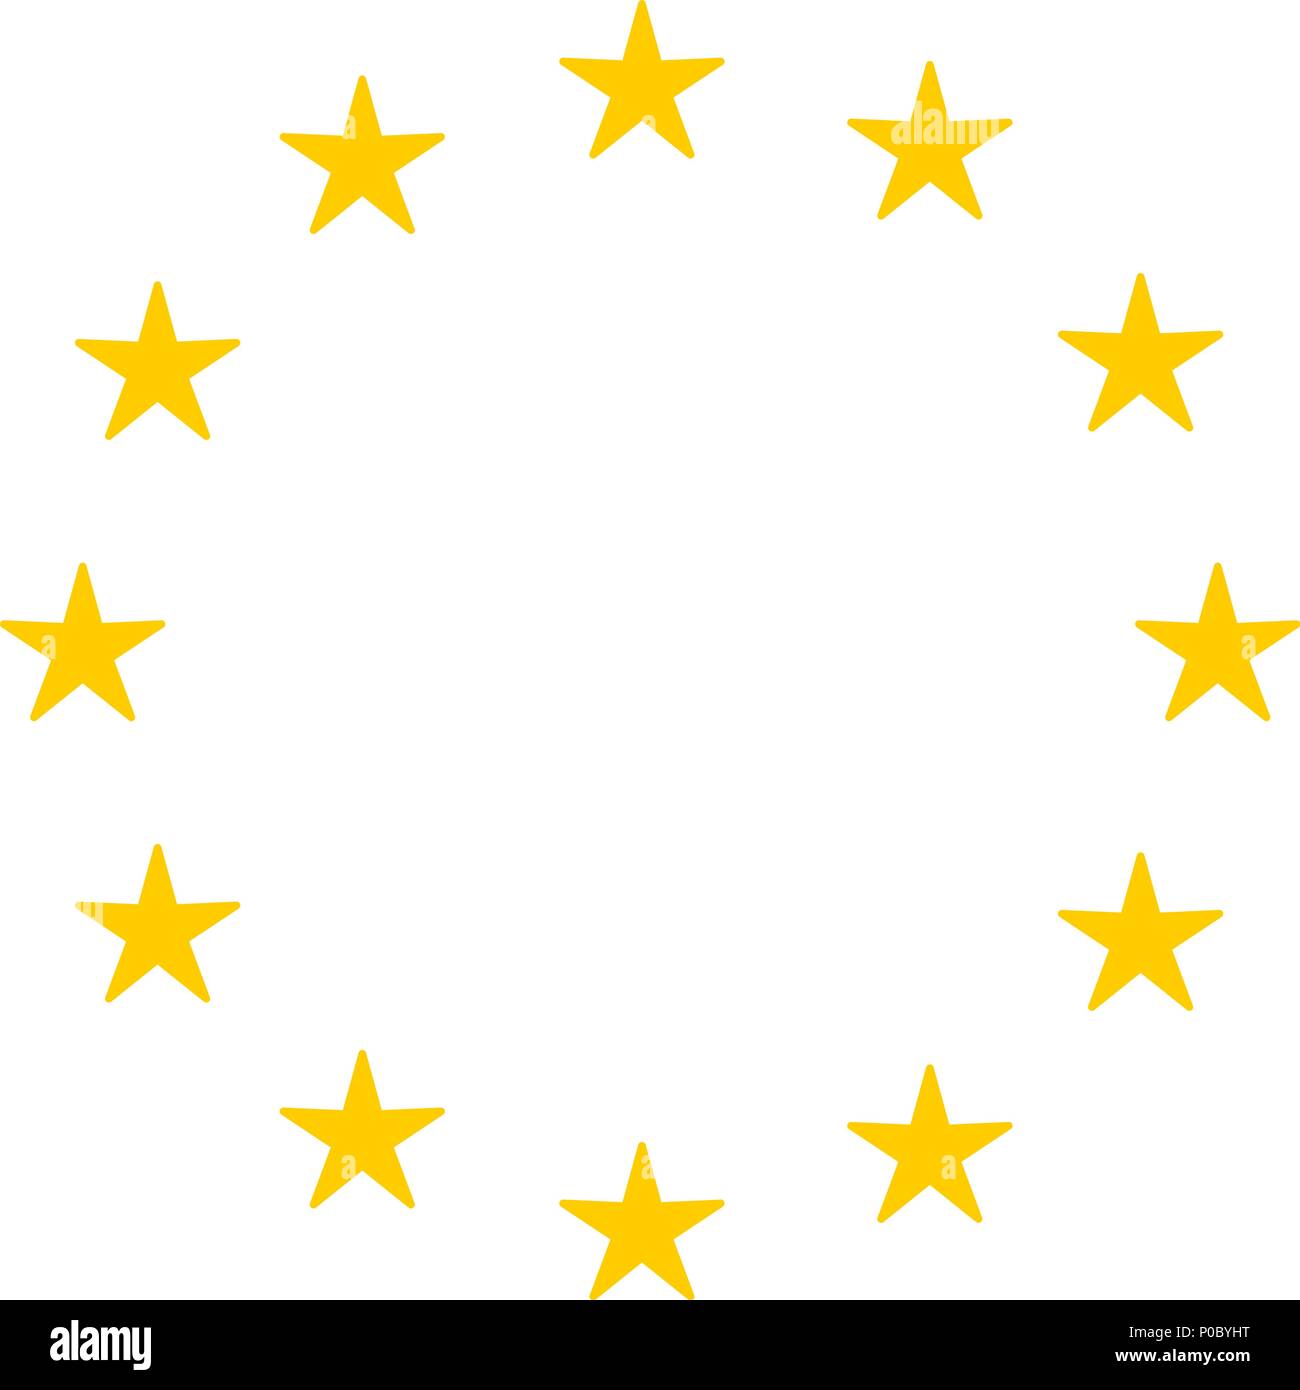 Circle of gold stars as in the European Union or EU flag Stock Vector